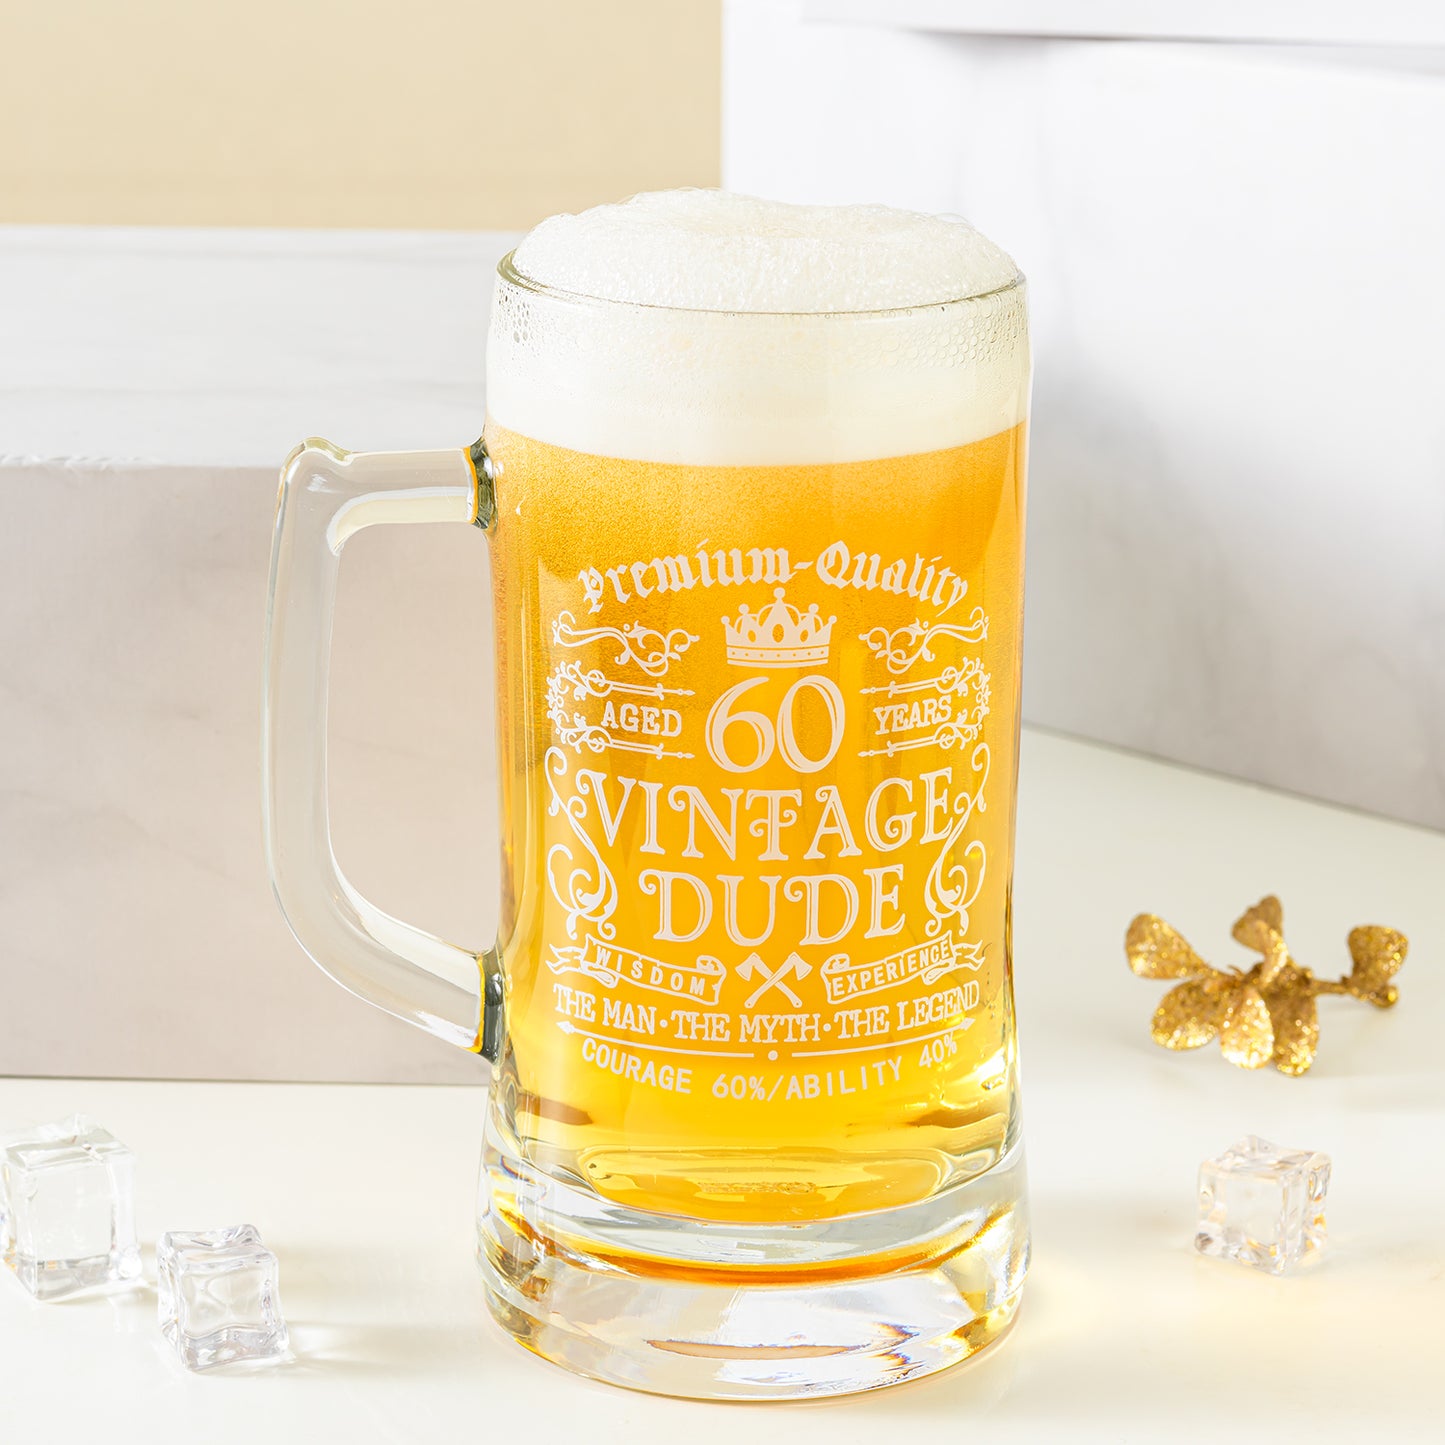 Crisky 60th Birthday Vintage Dude Beer Mug for Men 60 Years Old Gift 21 oz Birthday Beer Glass for Him, Husband, Father, Brother Friends Uncle Coworker, Large Capacity Beer Mug Gift, with Box